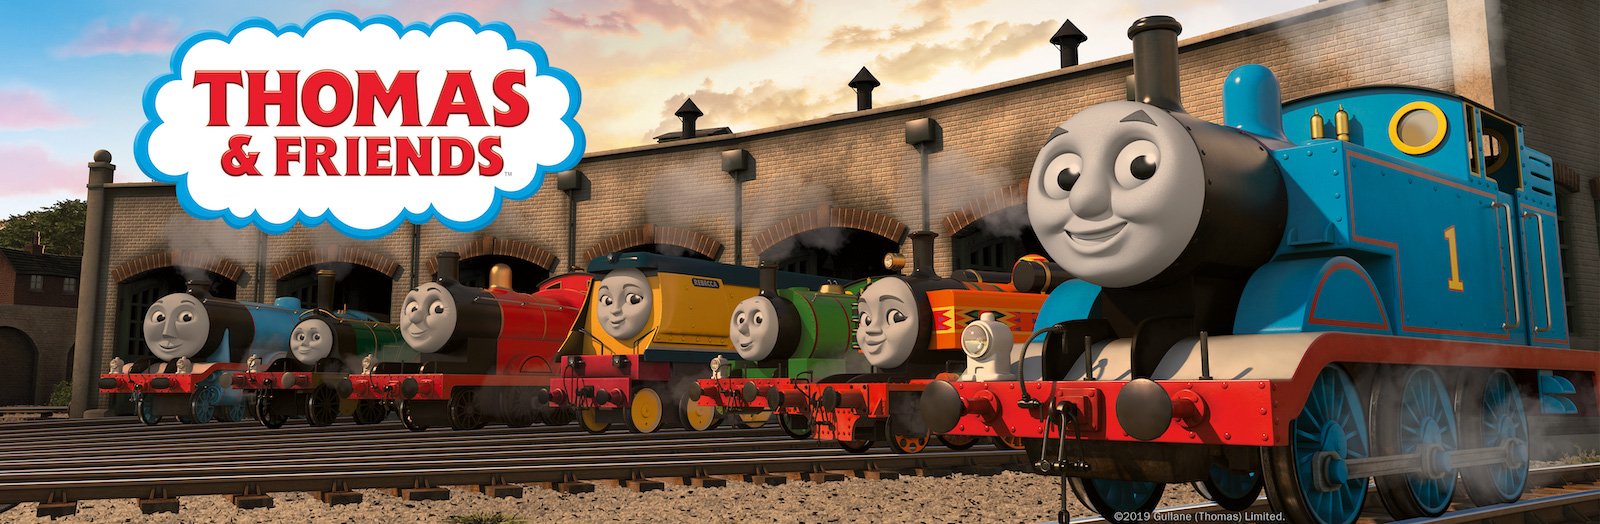 Characters from Thomas & Friends